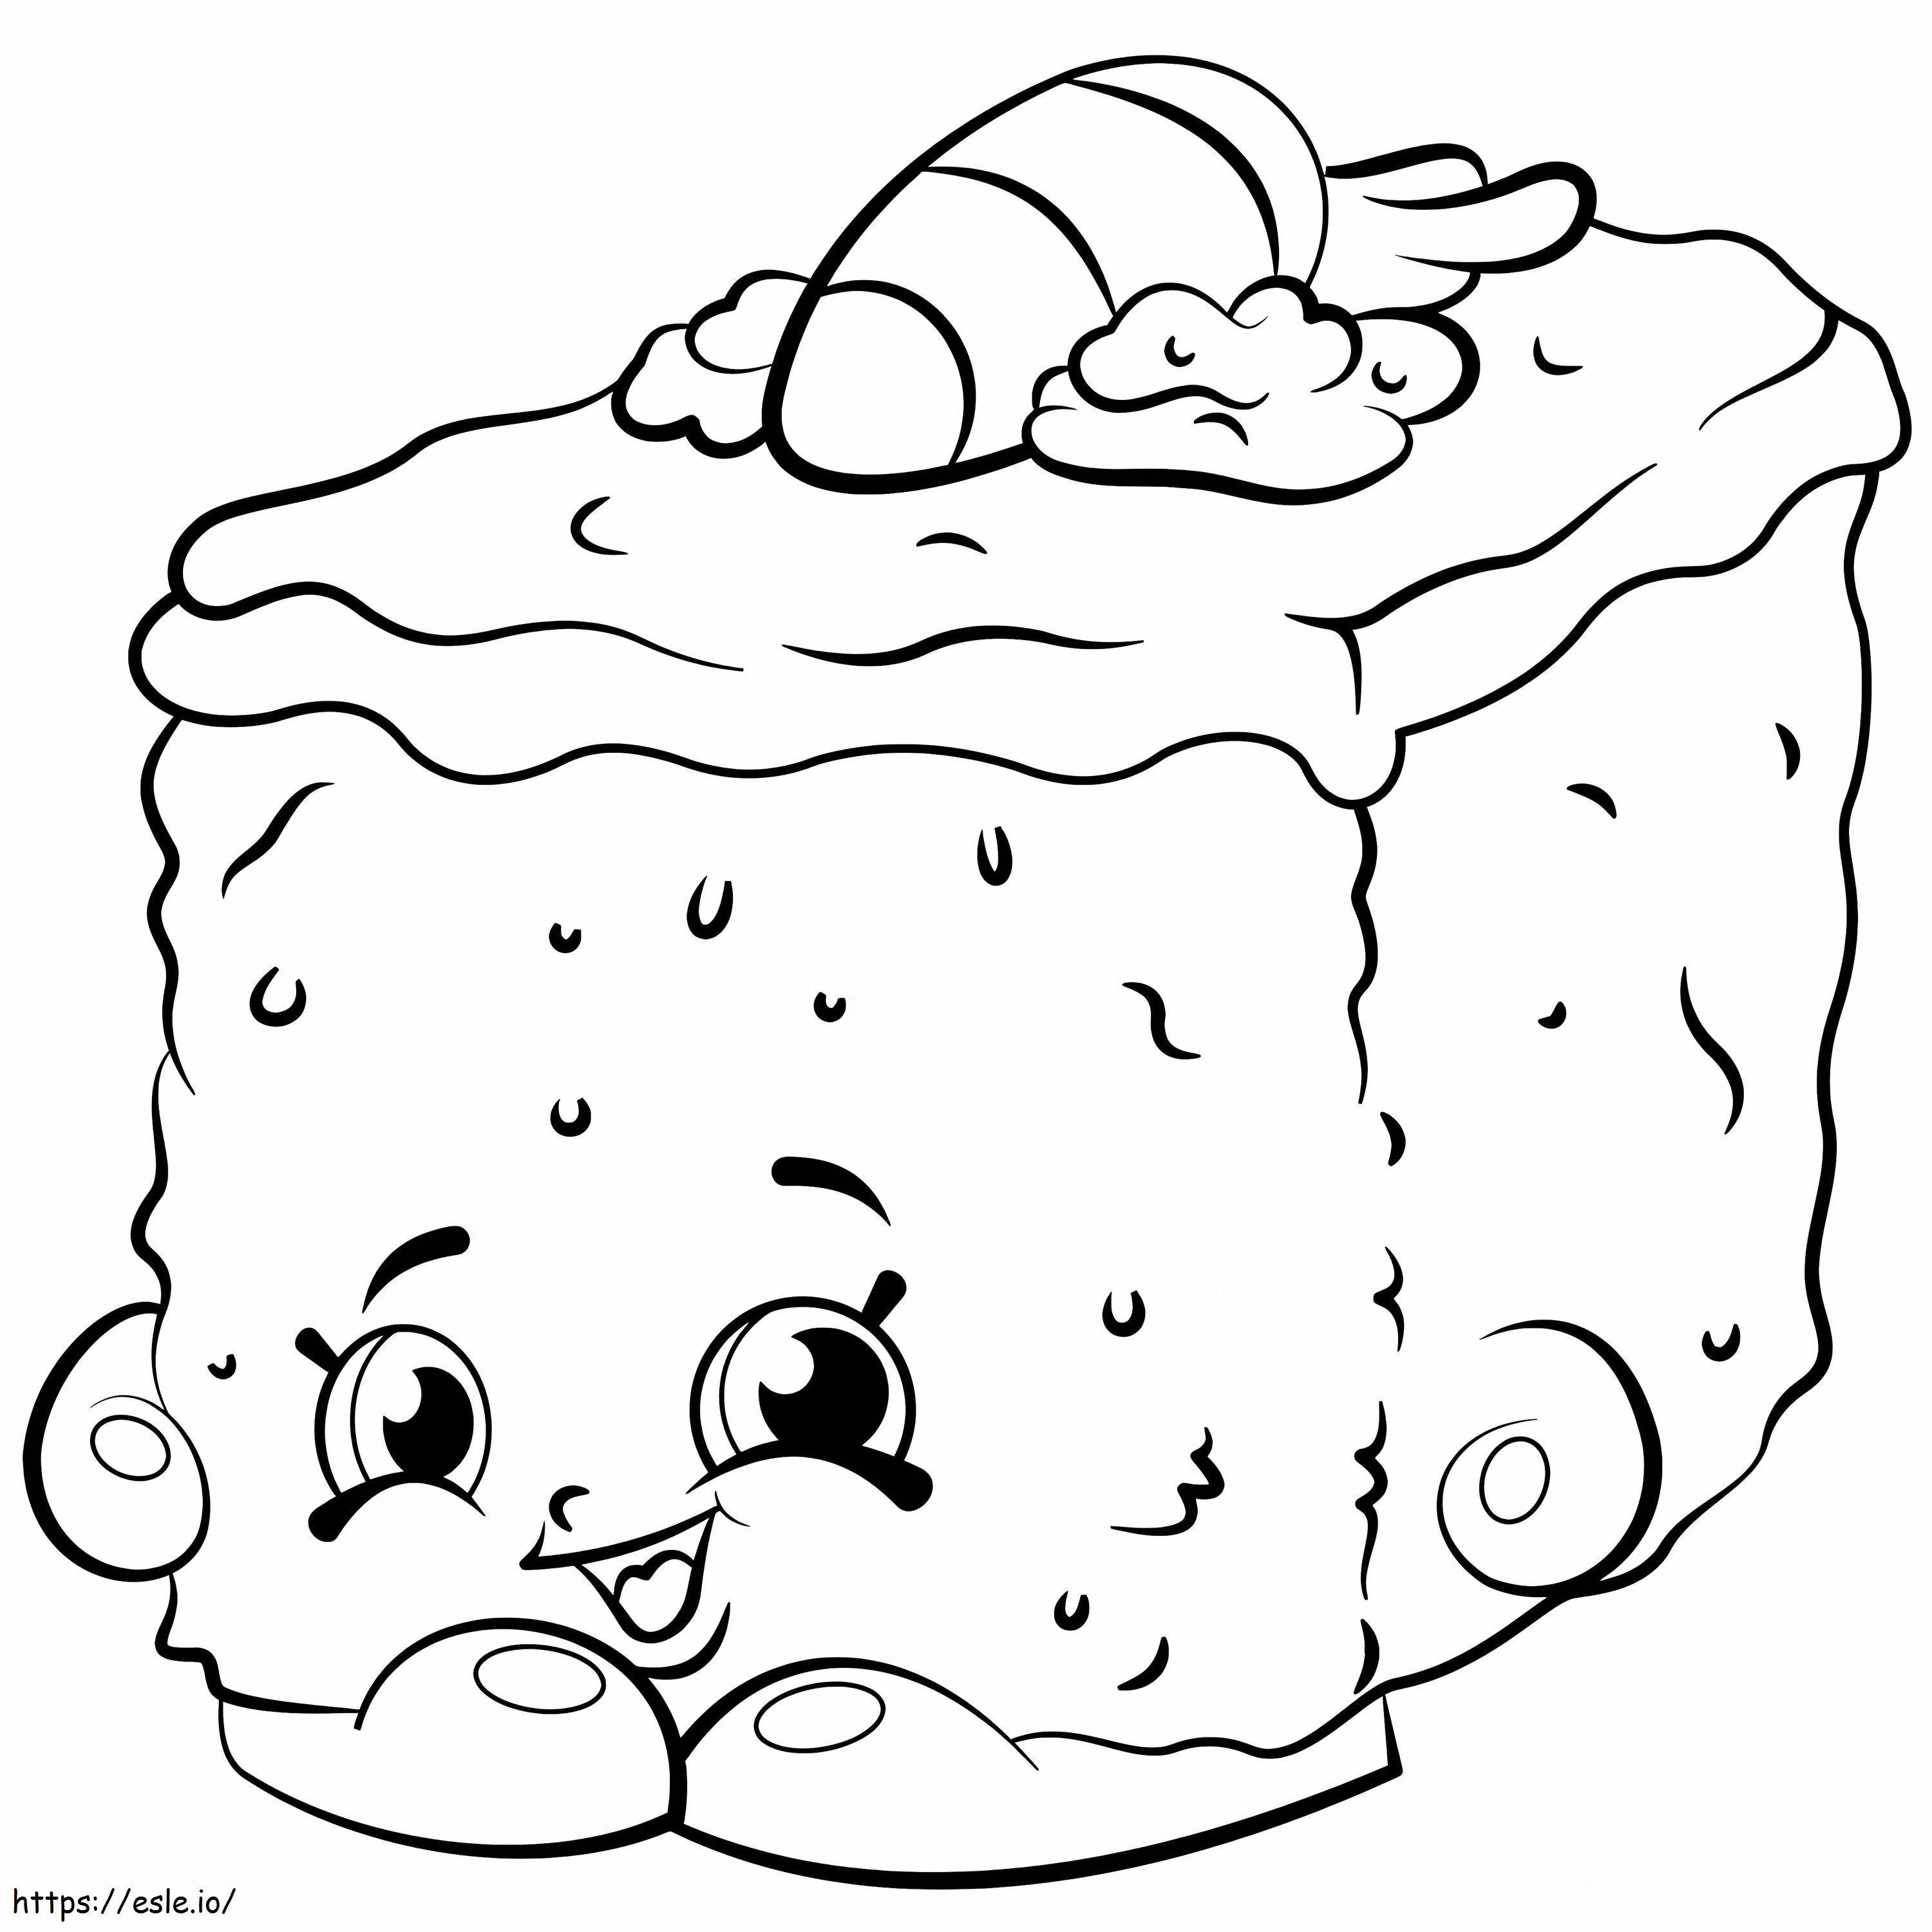 Bakery Carrie Carrot Cake Shopkins coloring page